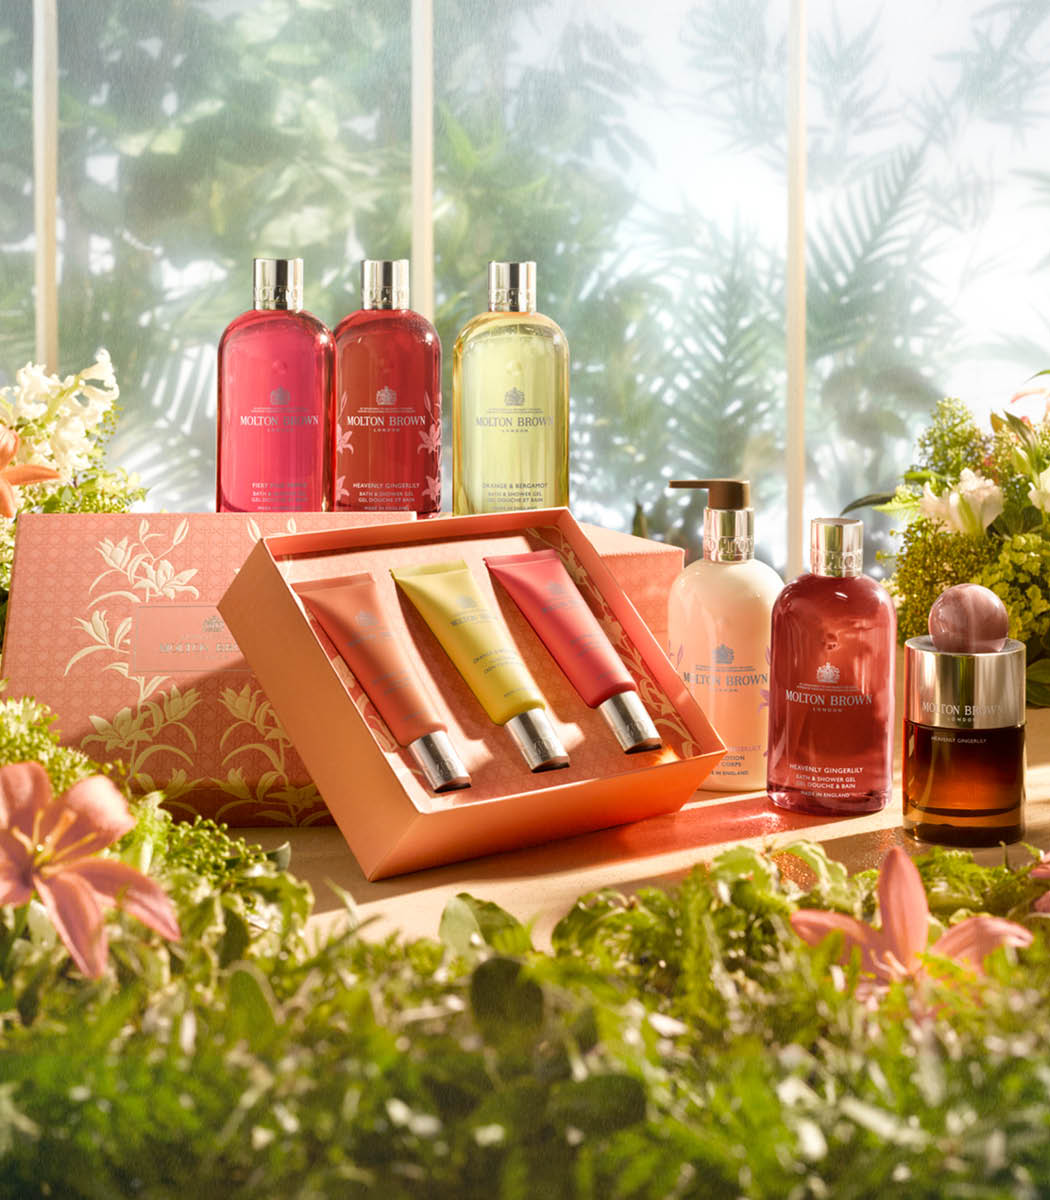 Luxury bath, body and beauty gifts